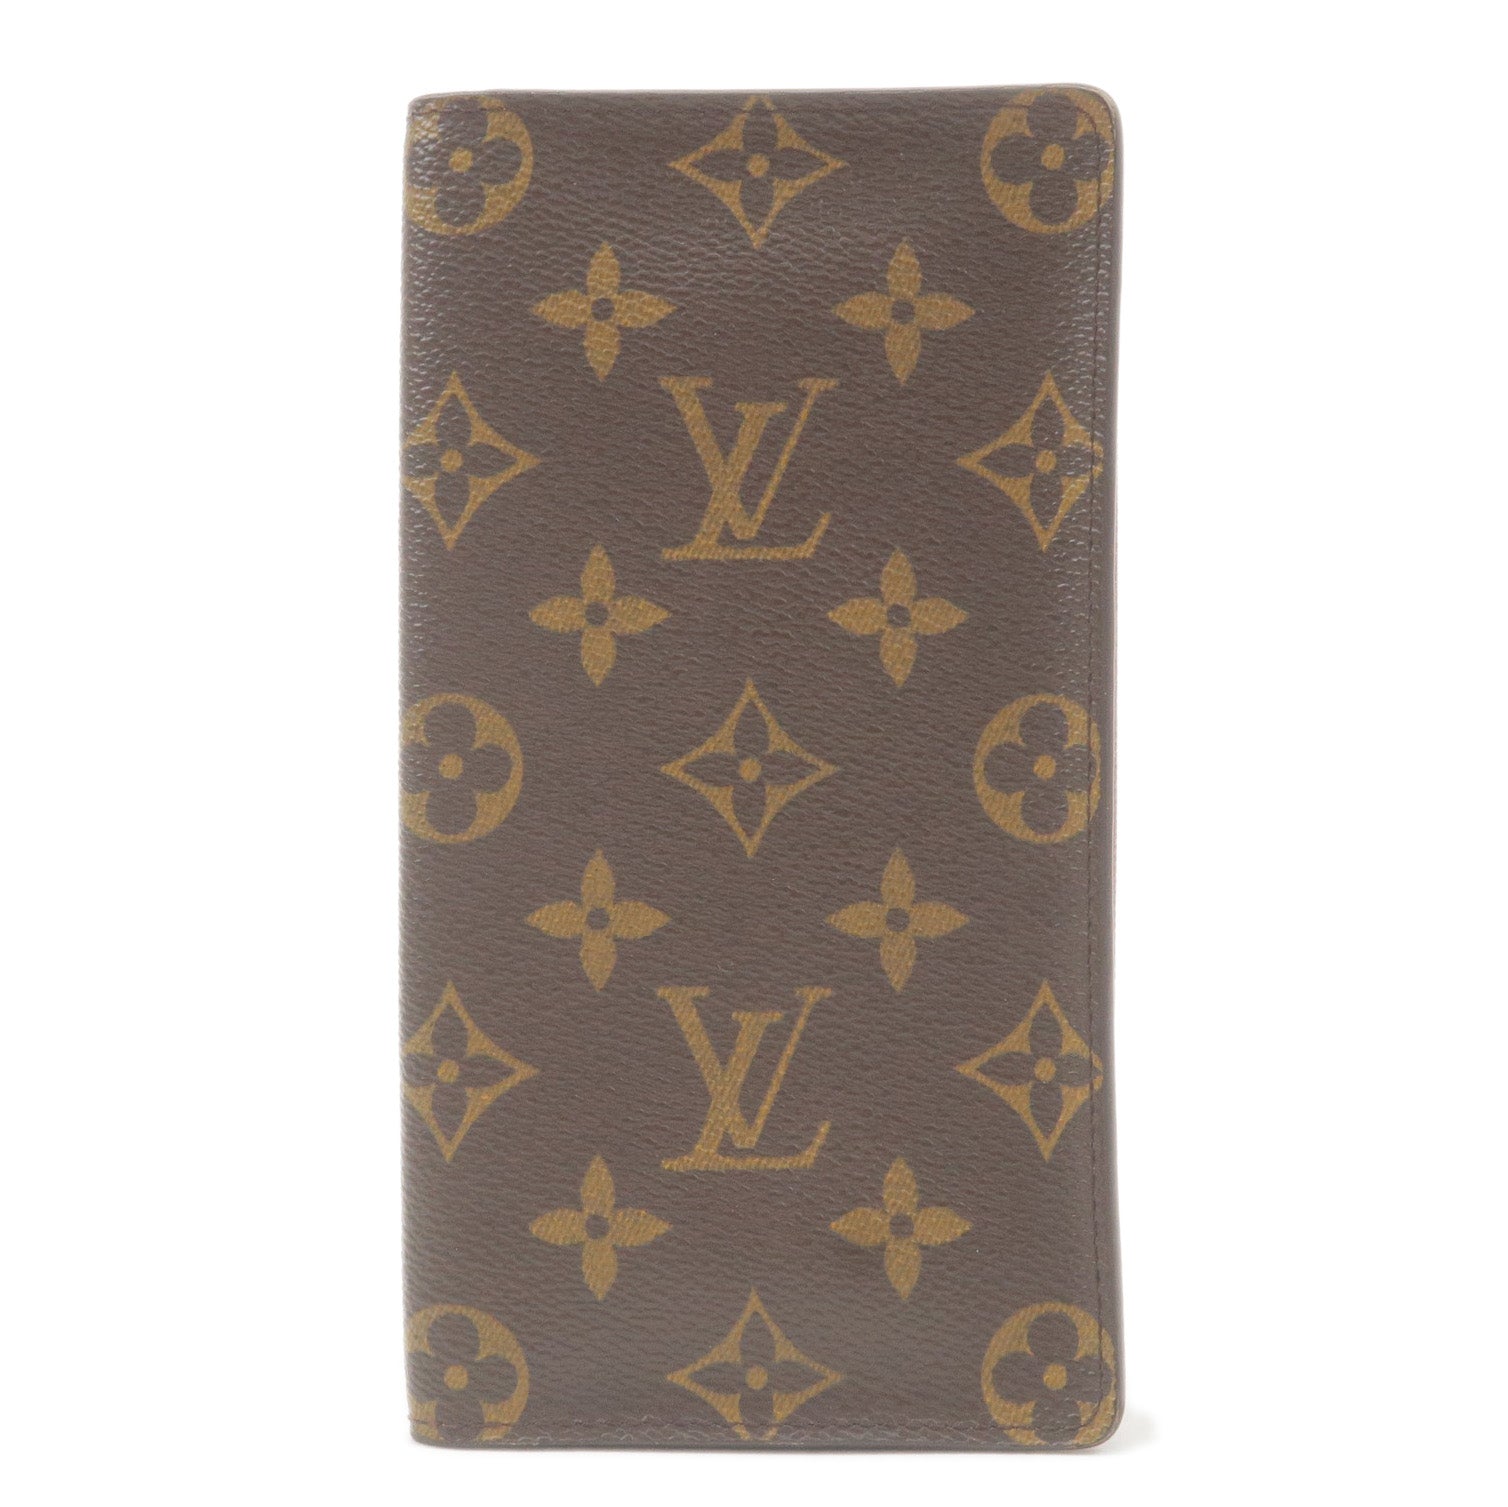 100% Authentic Louis Vuitton Long Monogram Wallet Made in France